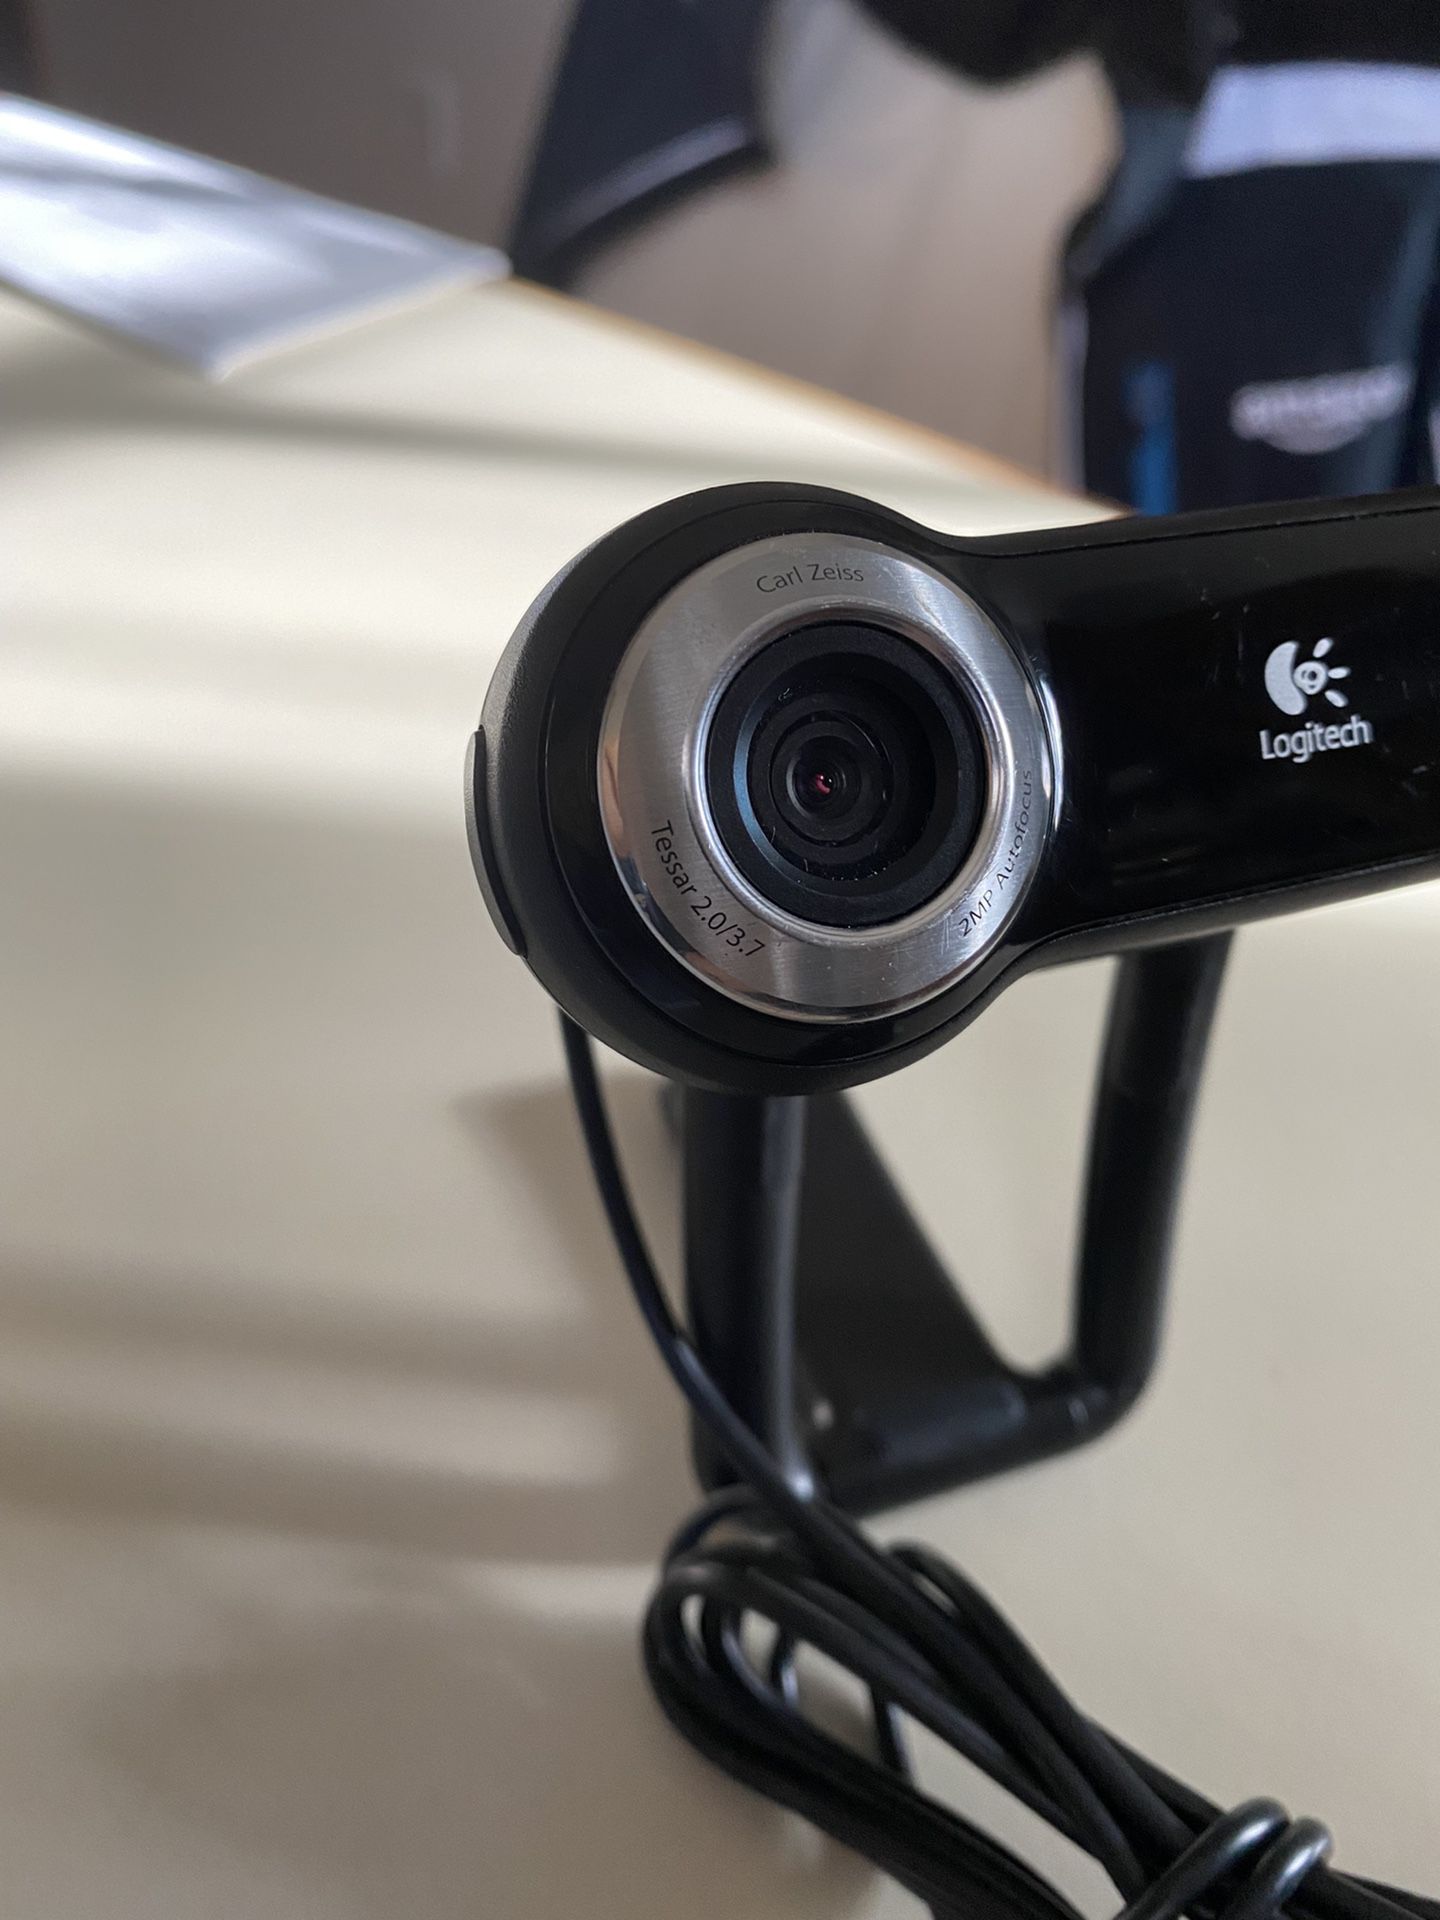 logitech Webcam tessar 2.0/3.7 for in North Andover, MA - OfferUp